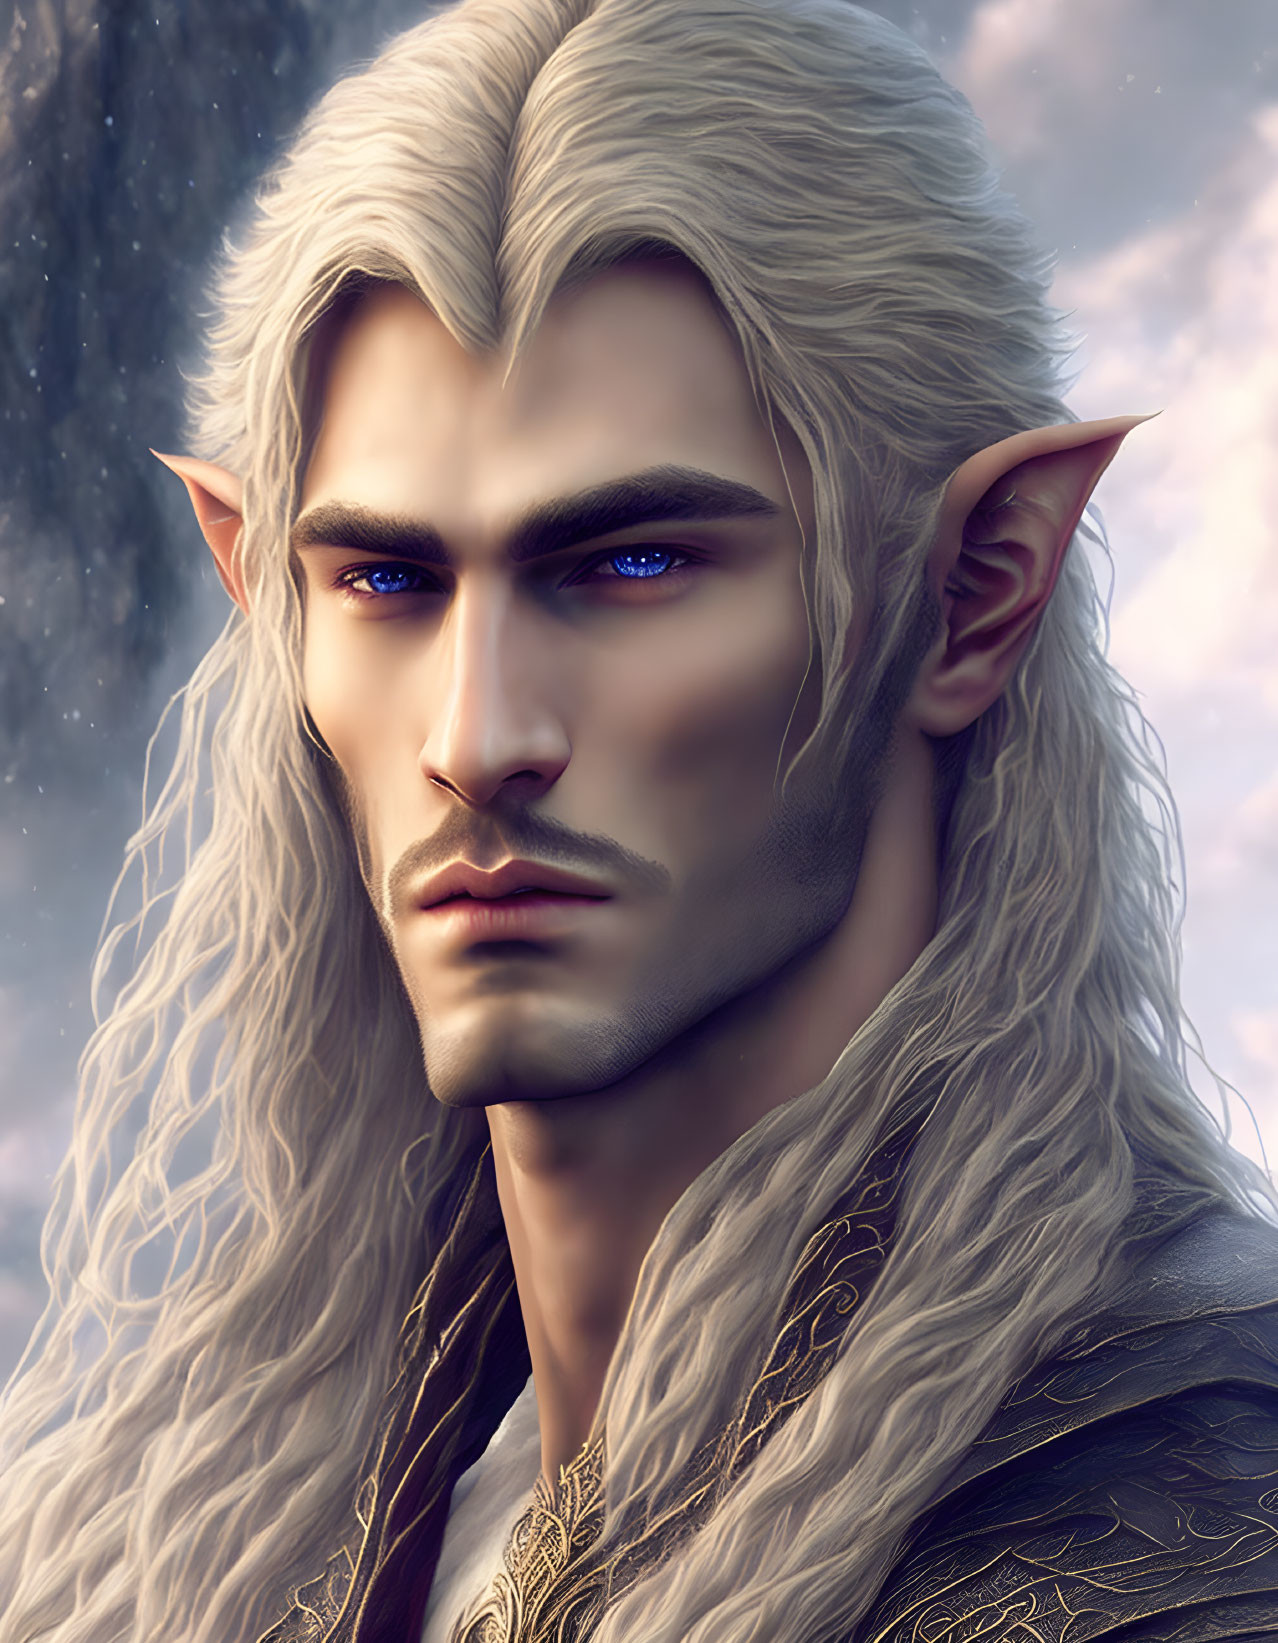 Elven male with white hair, blue eyes, in regal attire against celestial backdrop